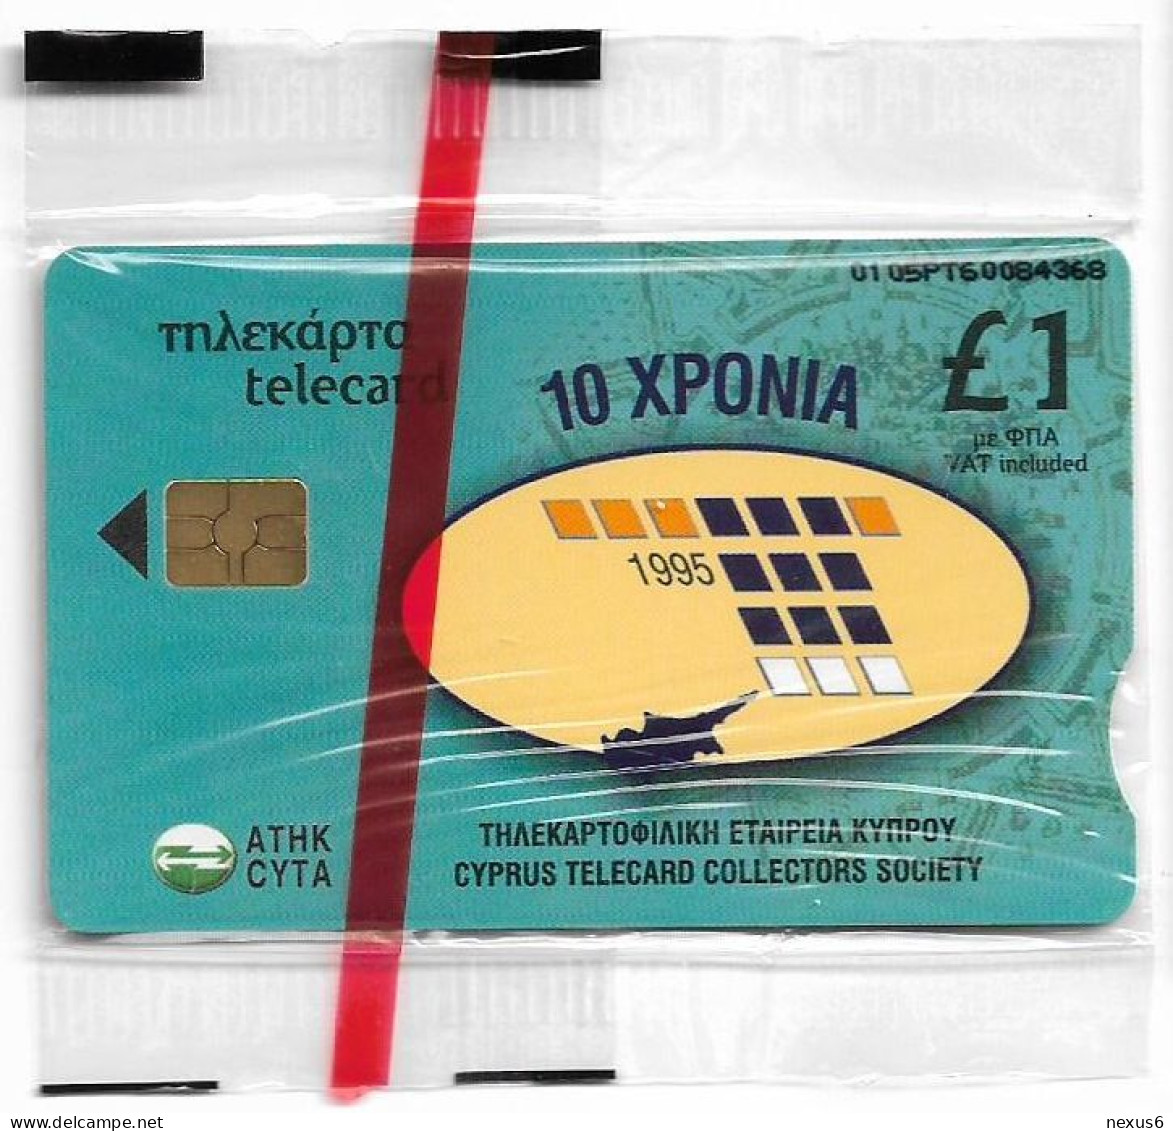 Cyprus - Cyta (Chip) - 10 Years Cyprus Telecard Collector's Society - 0105PT - 03.2005, 2.000ex, NSB - Cipro